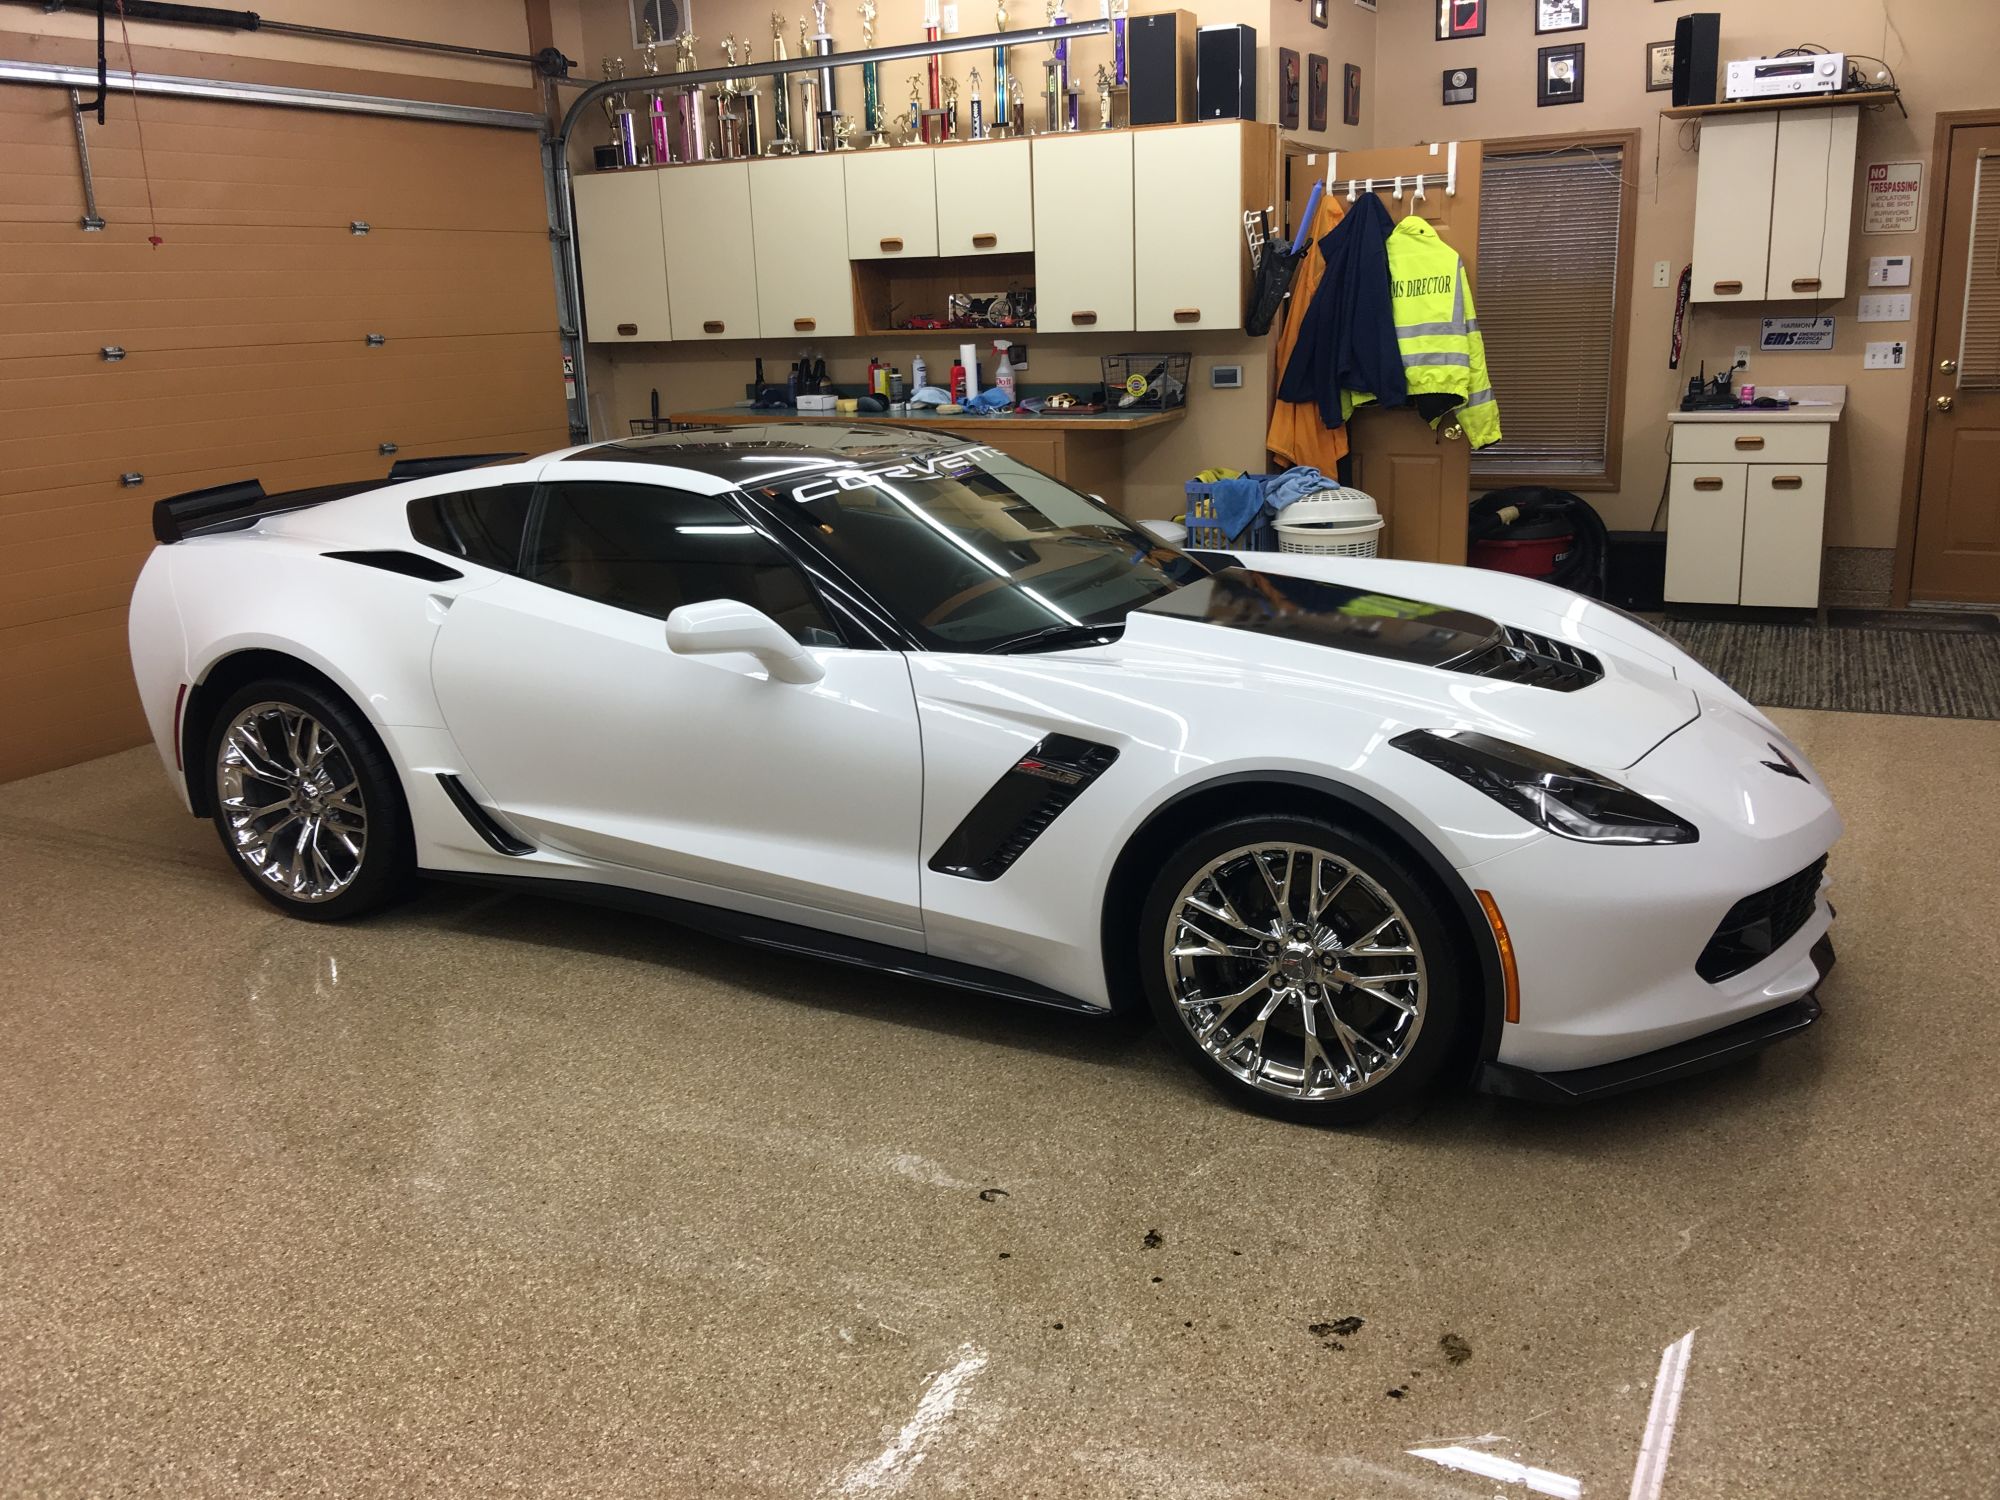 Corvette of the Week: “Used” Z06 With Just 165 Miles